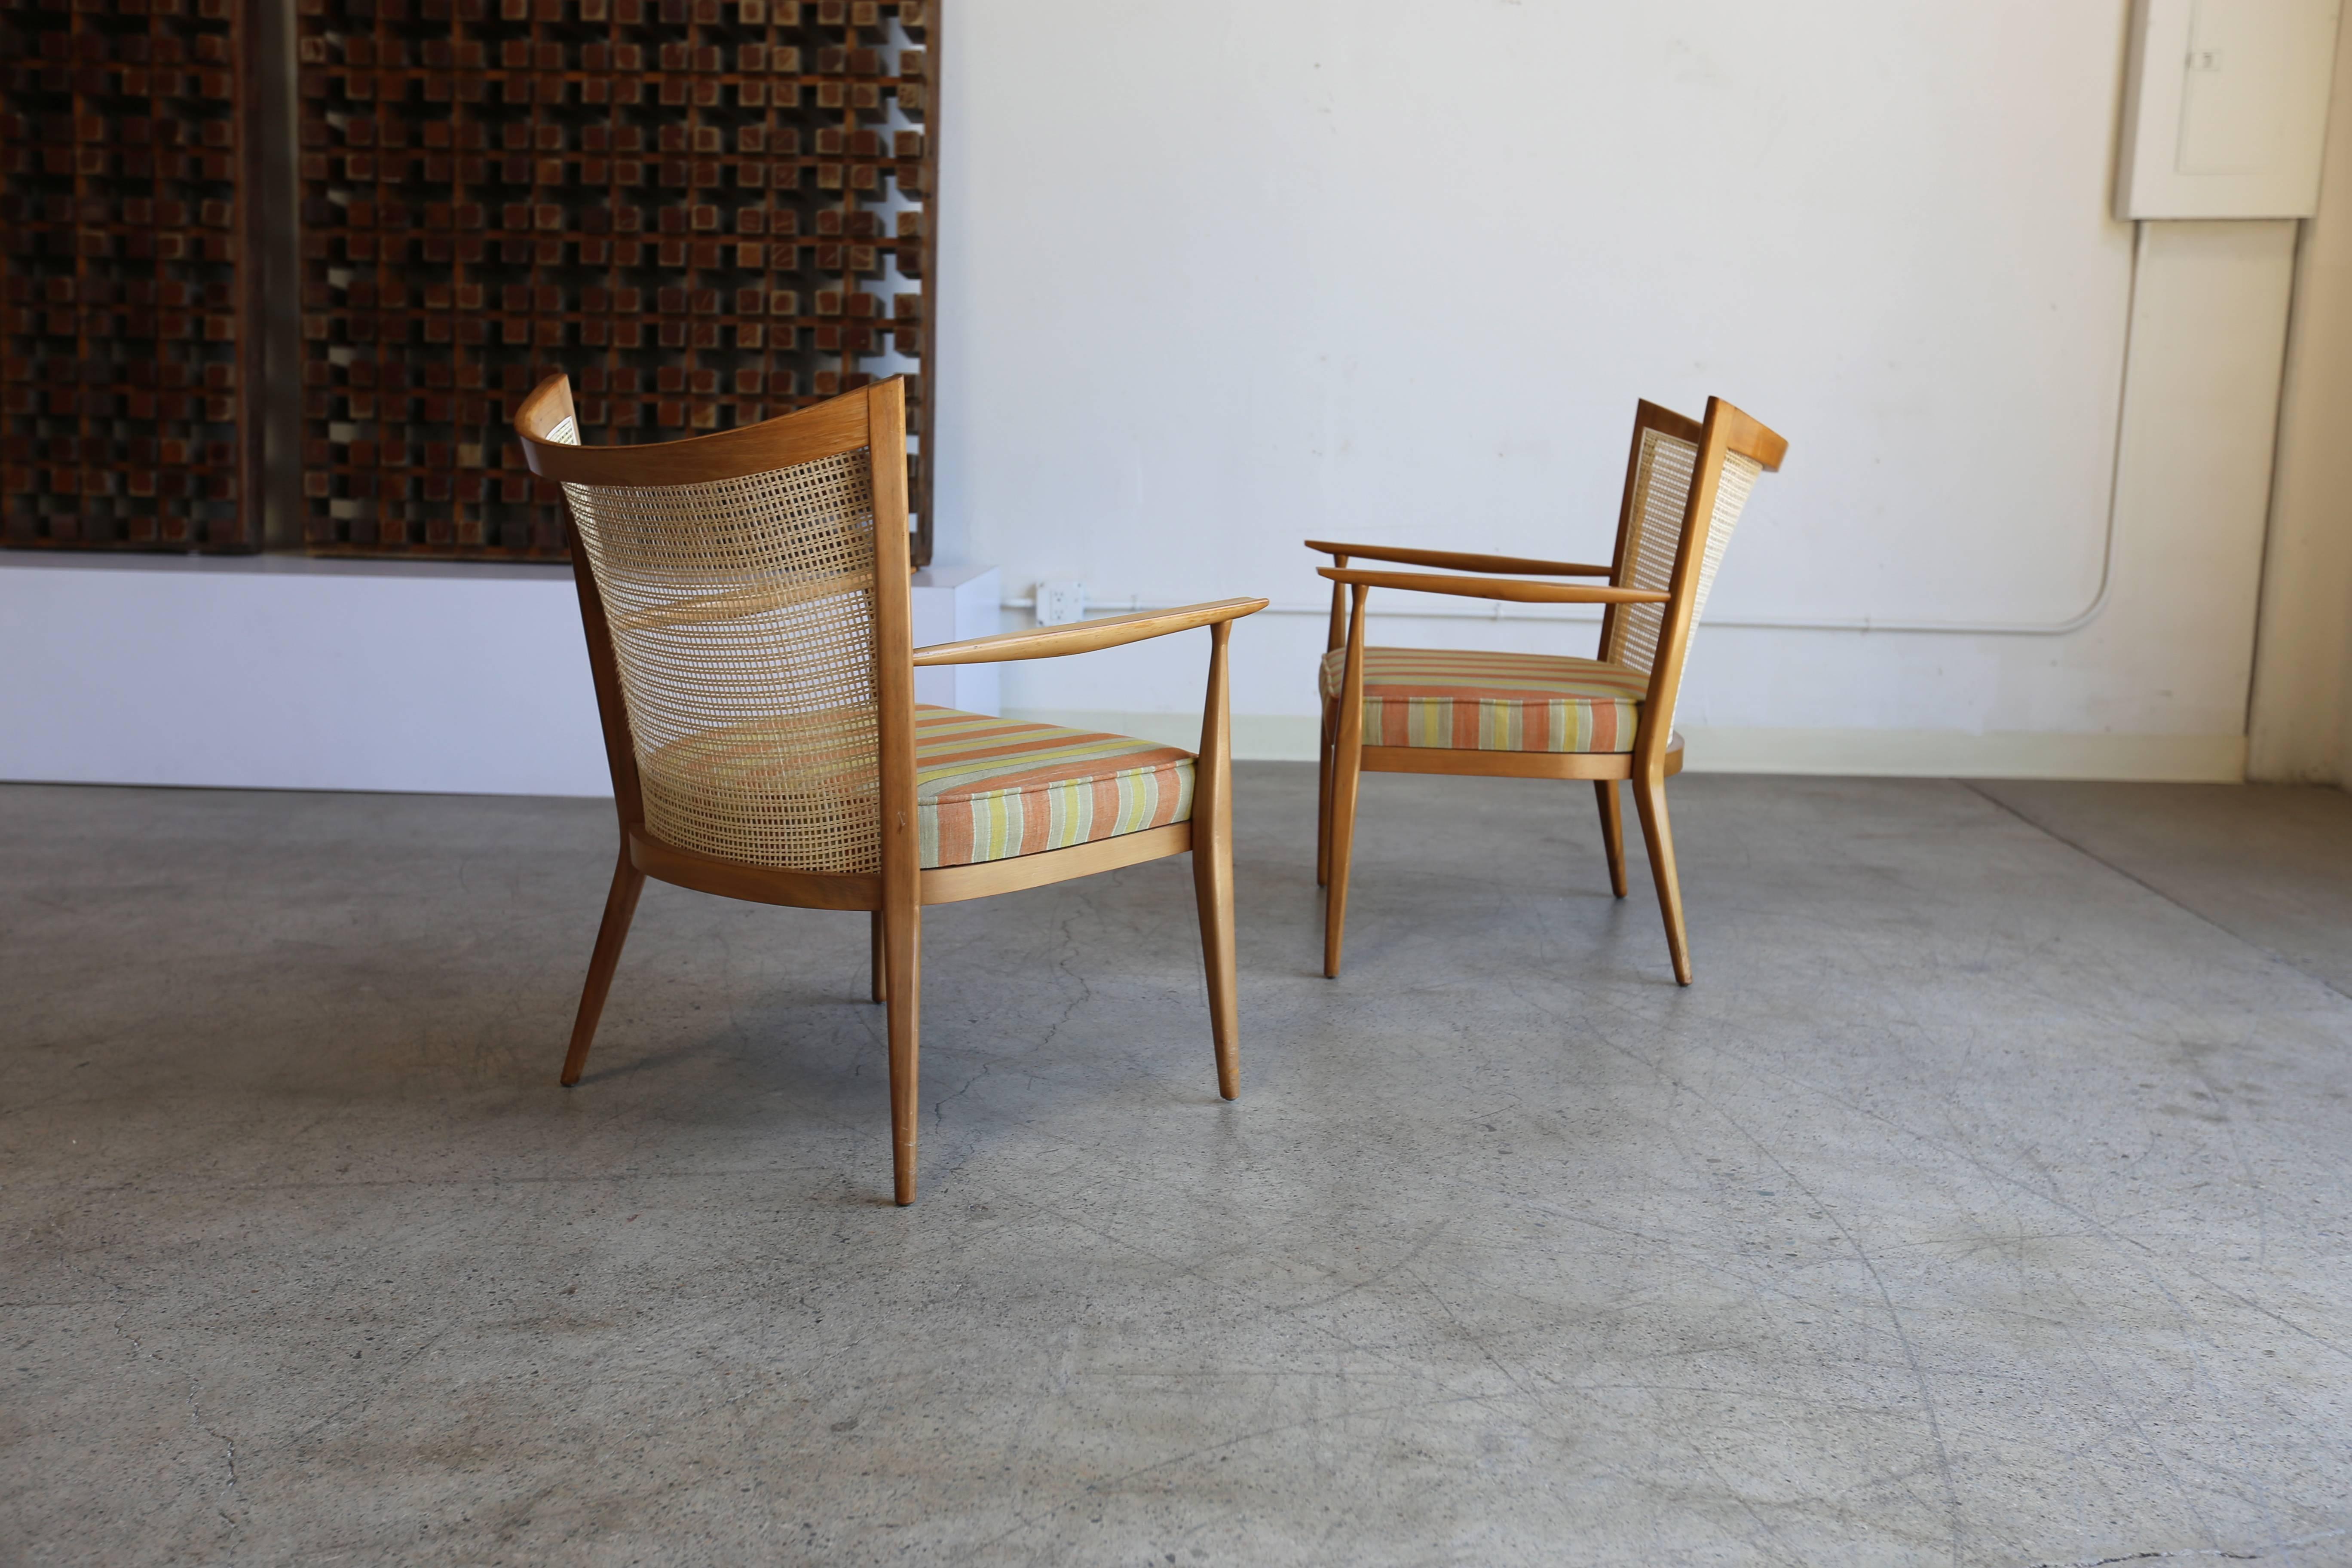 Pair of lounge chairs by Paul McCobb.